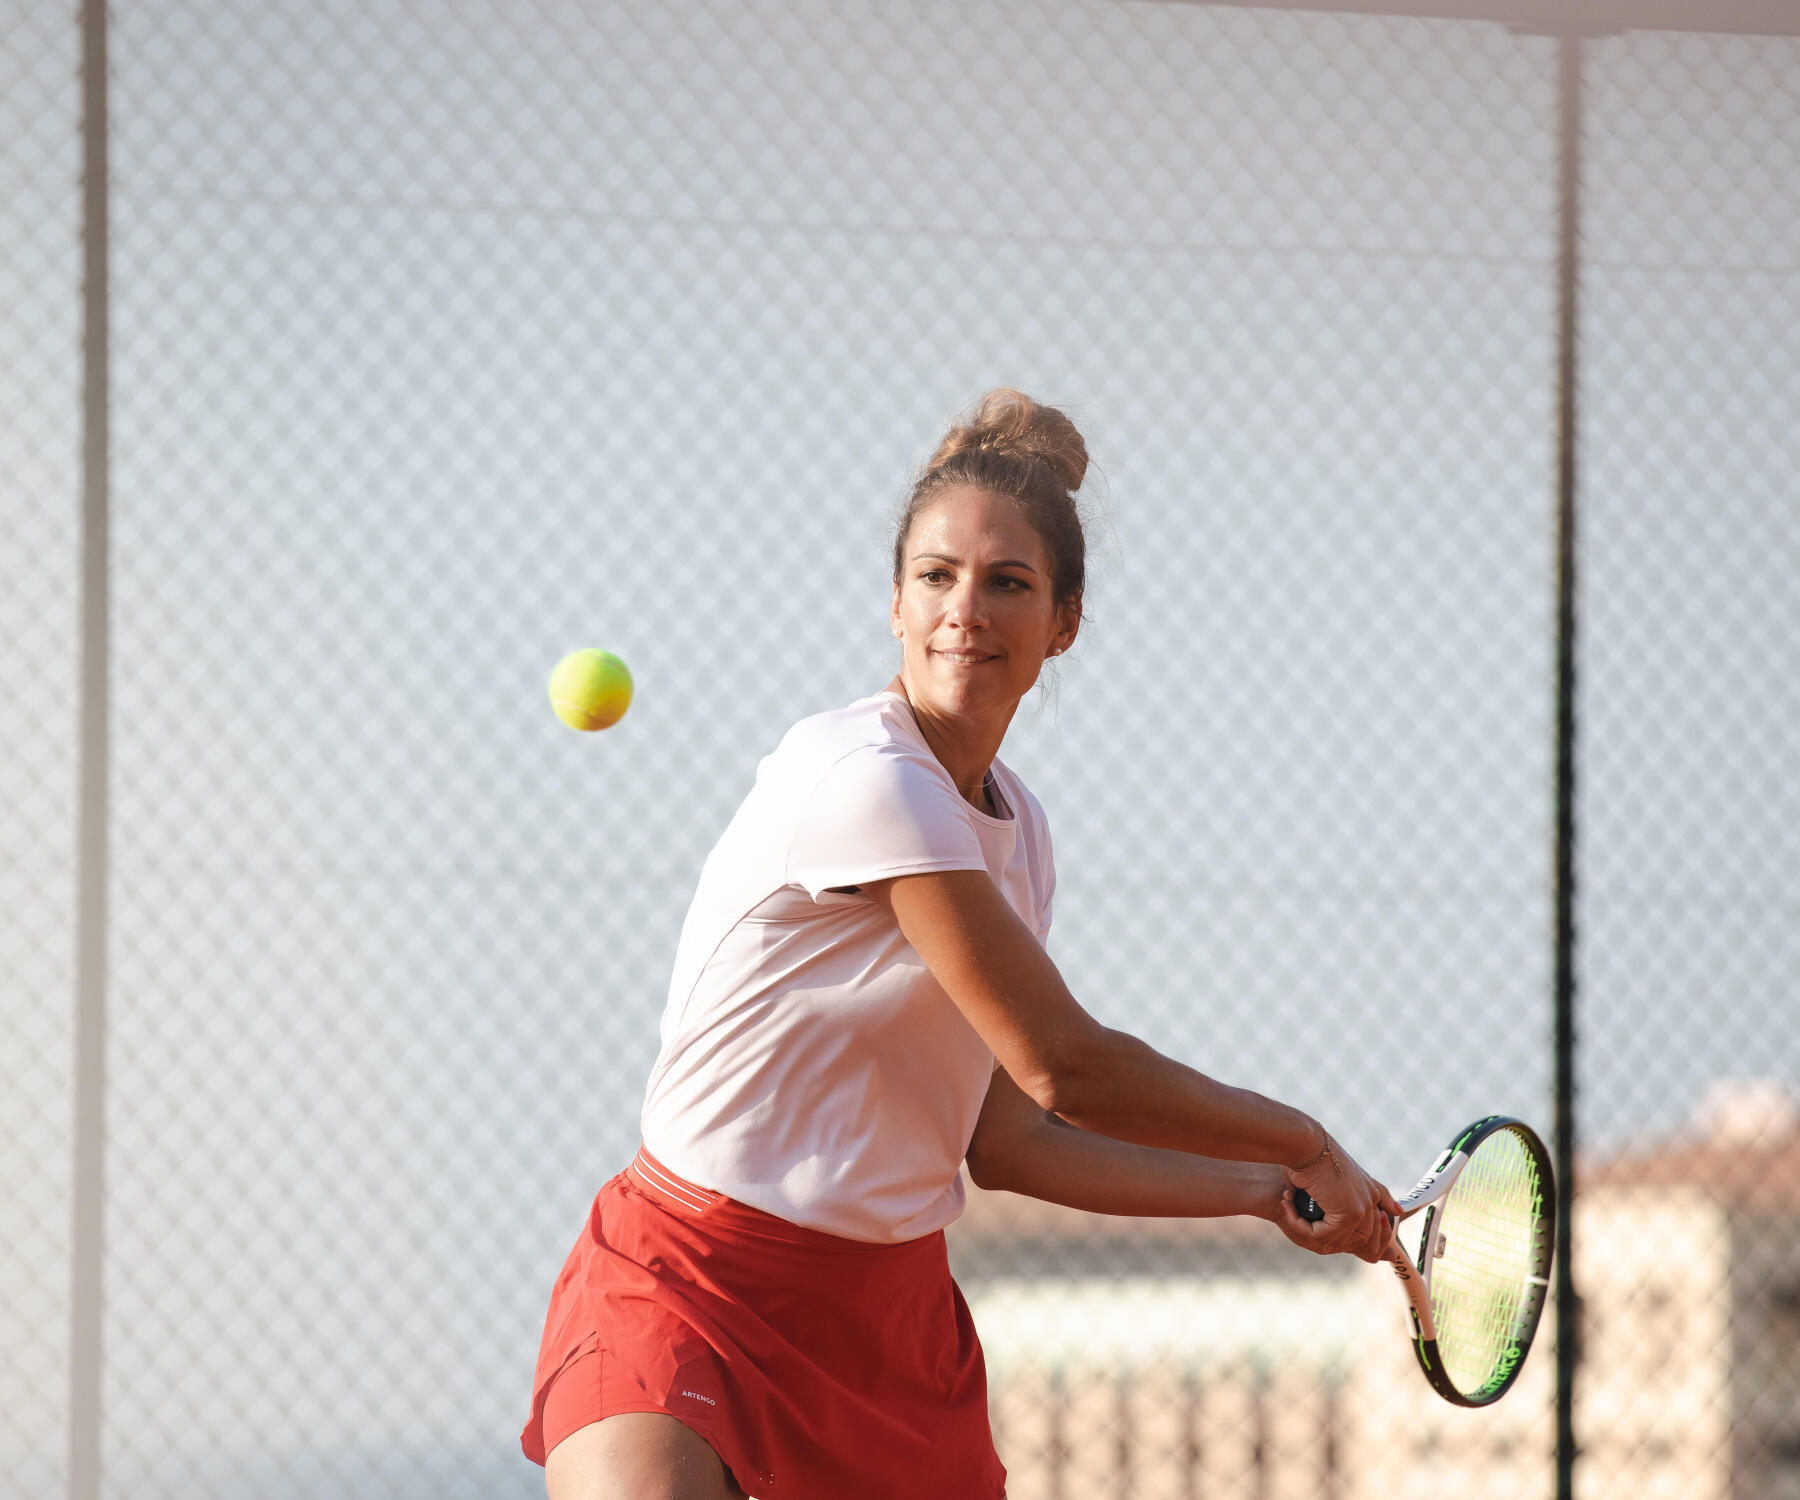 Tennis skills: how to hit a good cross-court backhand stroke